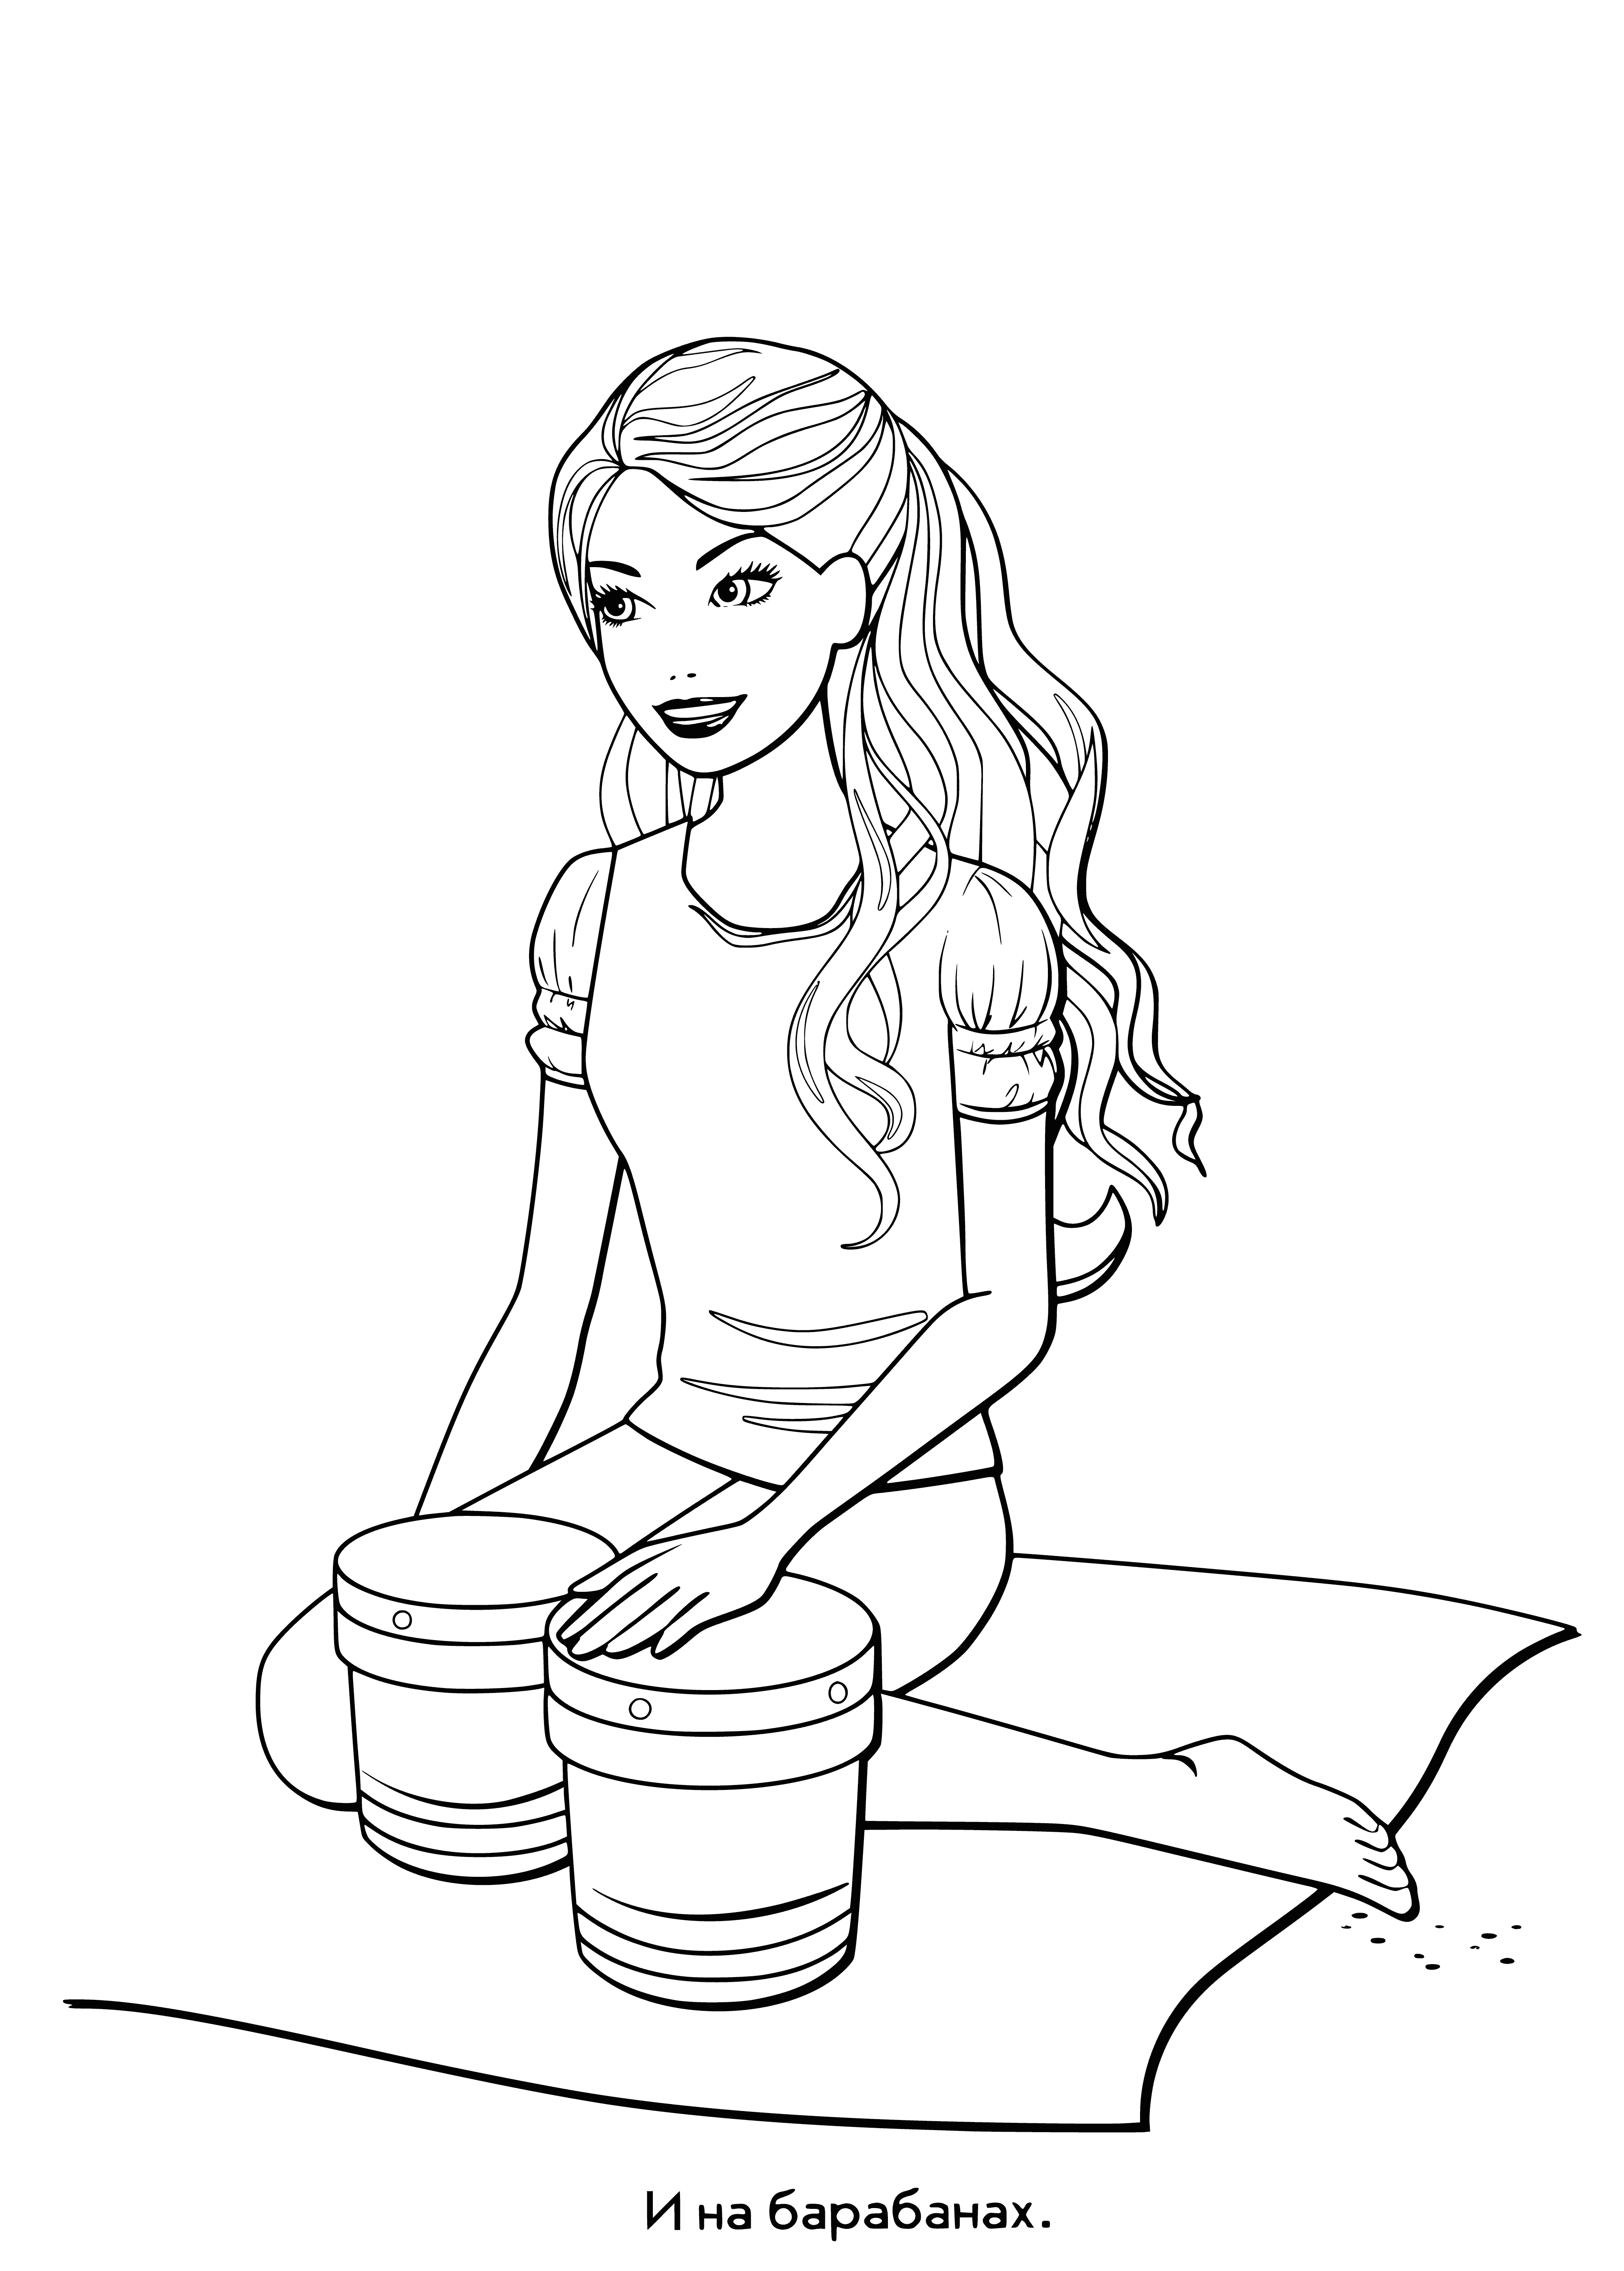 coloring page: Barbie is playing drums in a pink shirt, headband, and in front of a drum set, arms moving up and down. #BarbieDrummer